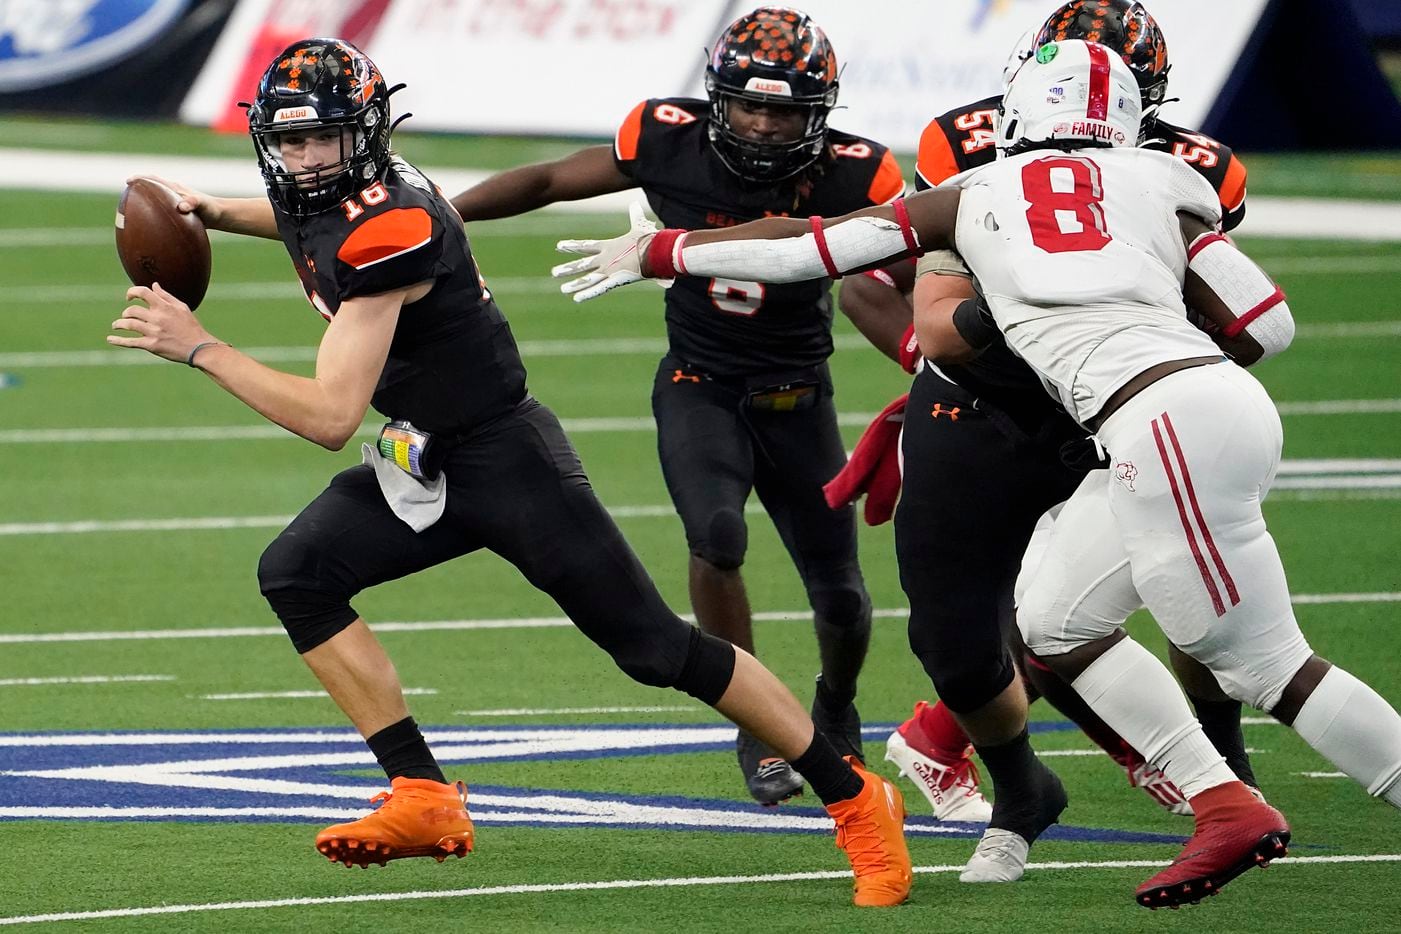 Aledo quarterback Brayden Fowler-Nicolosi (16) gets past Crosby defensive lineman Jeremiah Isaac (8) during the first half of the Class 5A Division II state football championship game at AT&T Stadium on Friday, Jan. 15, 2021, in Arlington. (Smiley N. Pool/The Dallas Morning News)